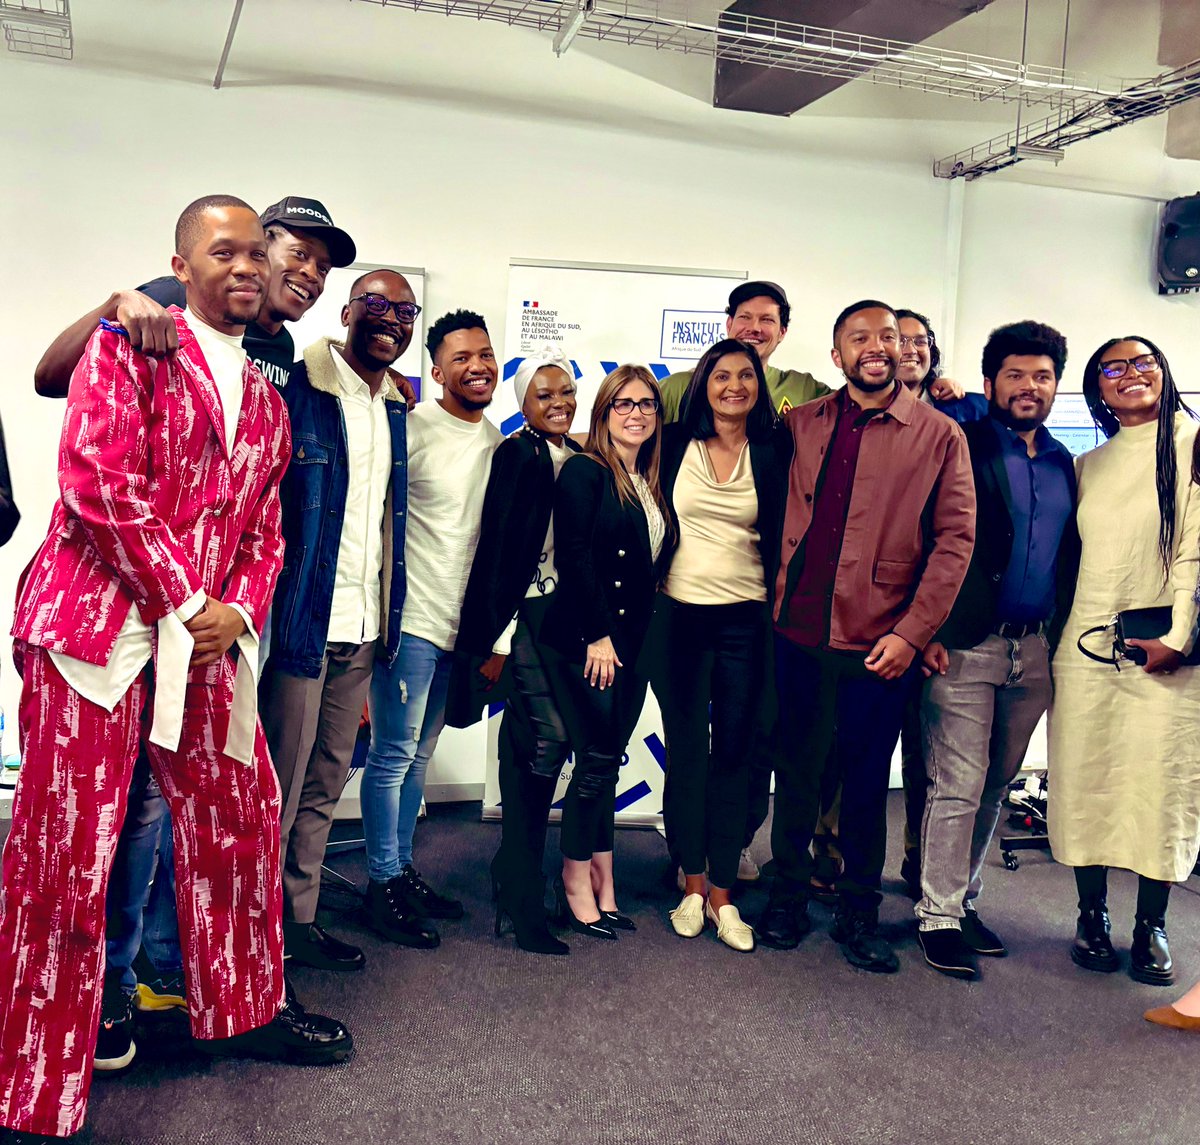 It’s a wrap! What an exciting morning at UVU Africa! More than 700 ambitious entrepreneurs initially applied to be part of the Création Africa programme, which promised a journey of empowerment and growth for Southern Africa’s creative landscape.